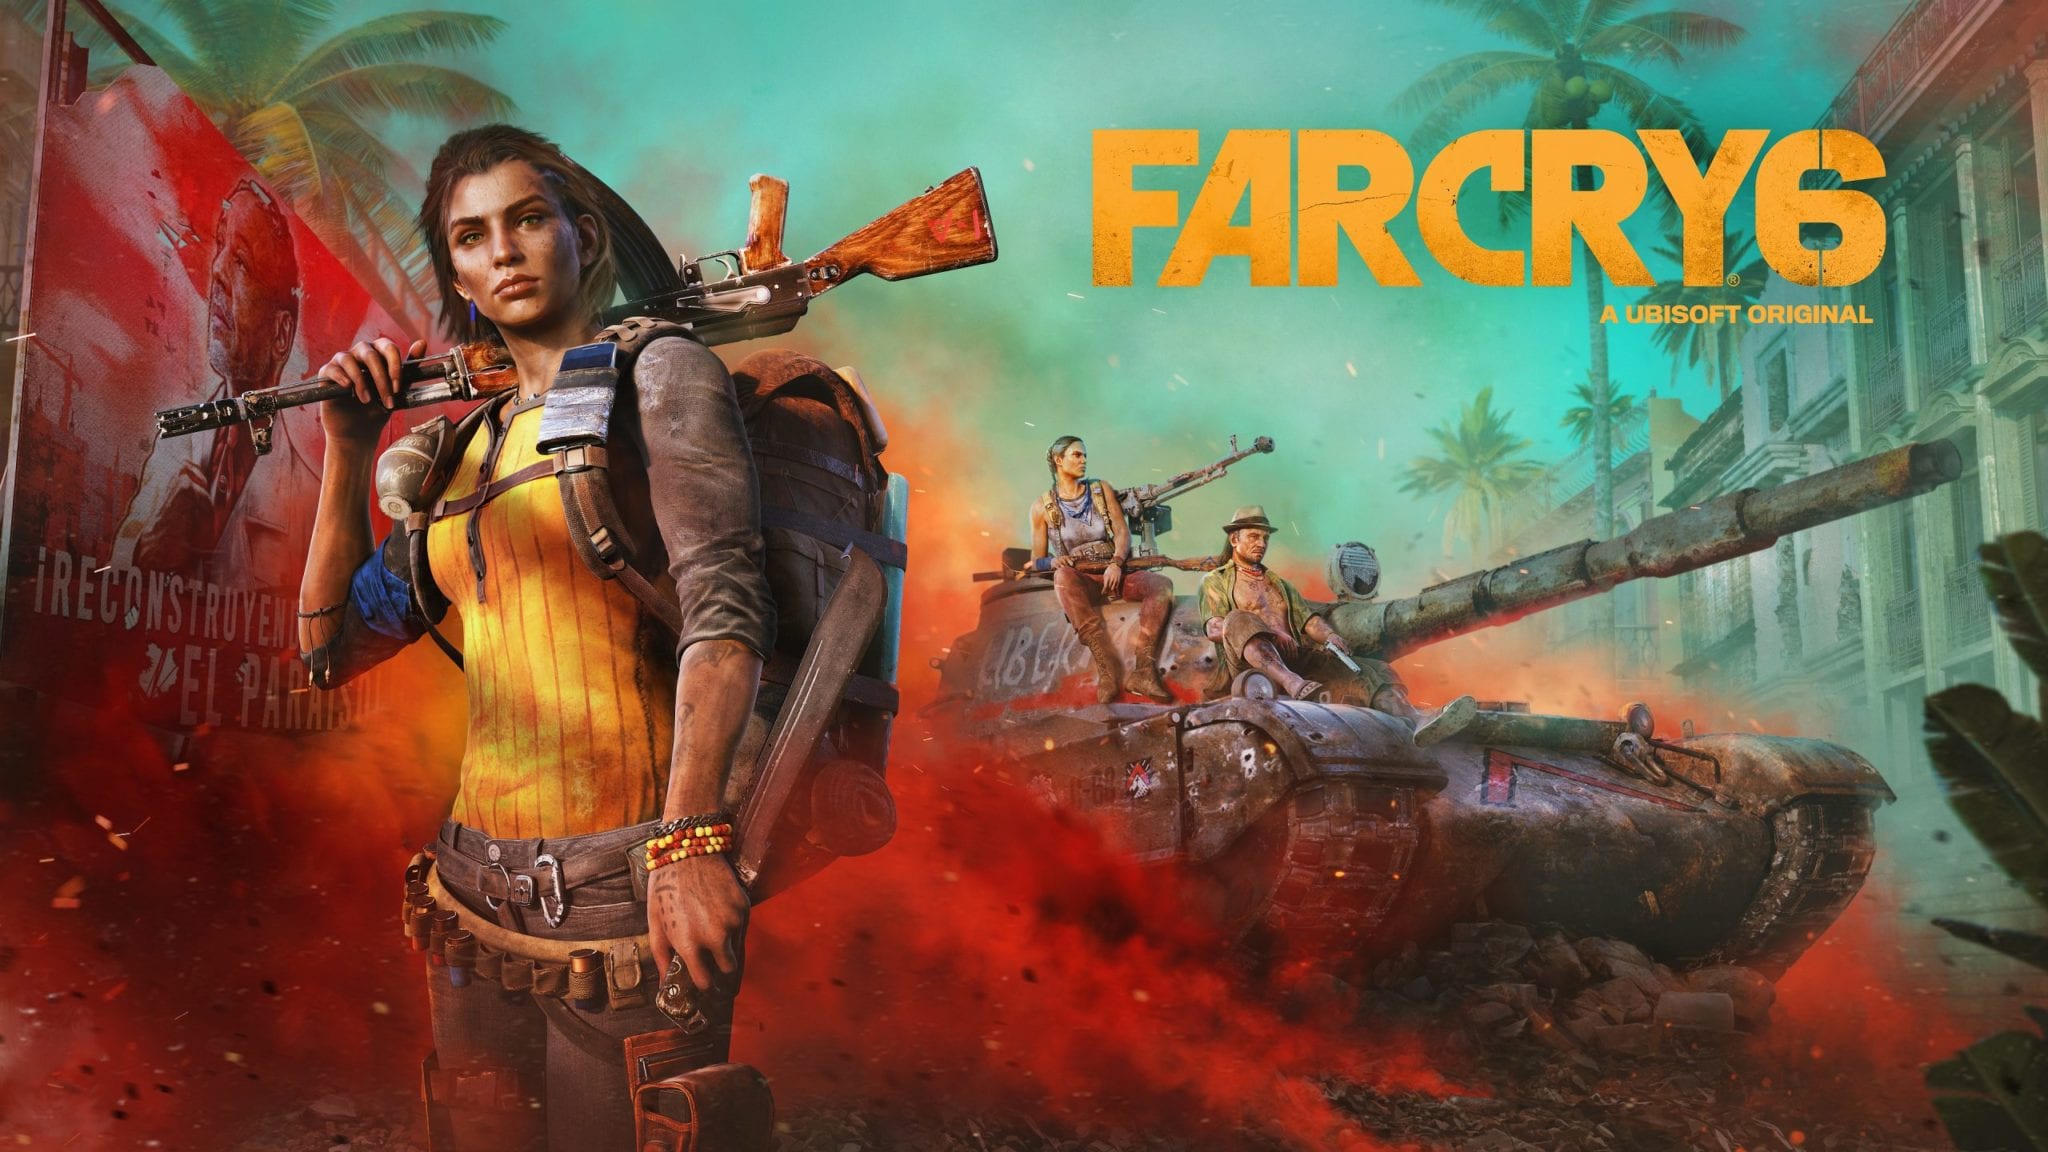 far cry 6 steam download free